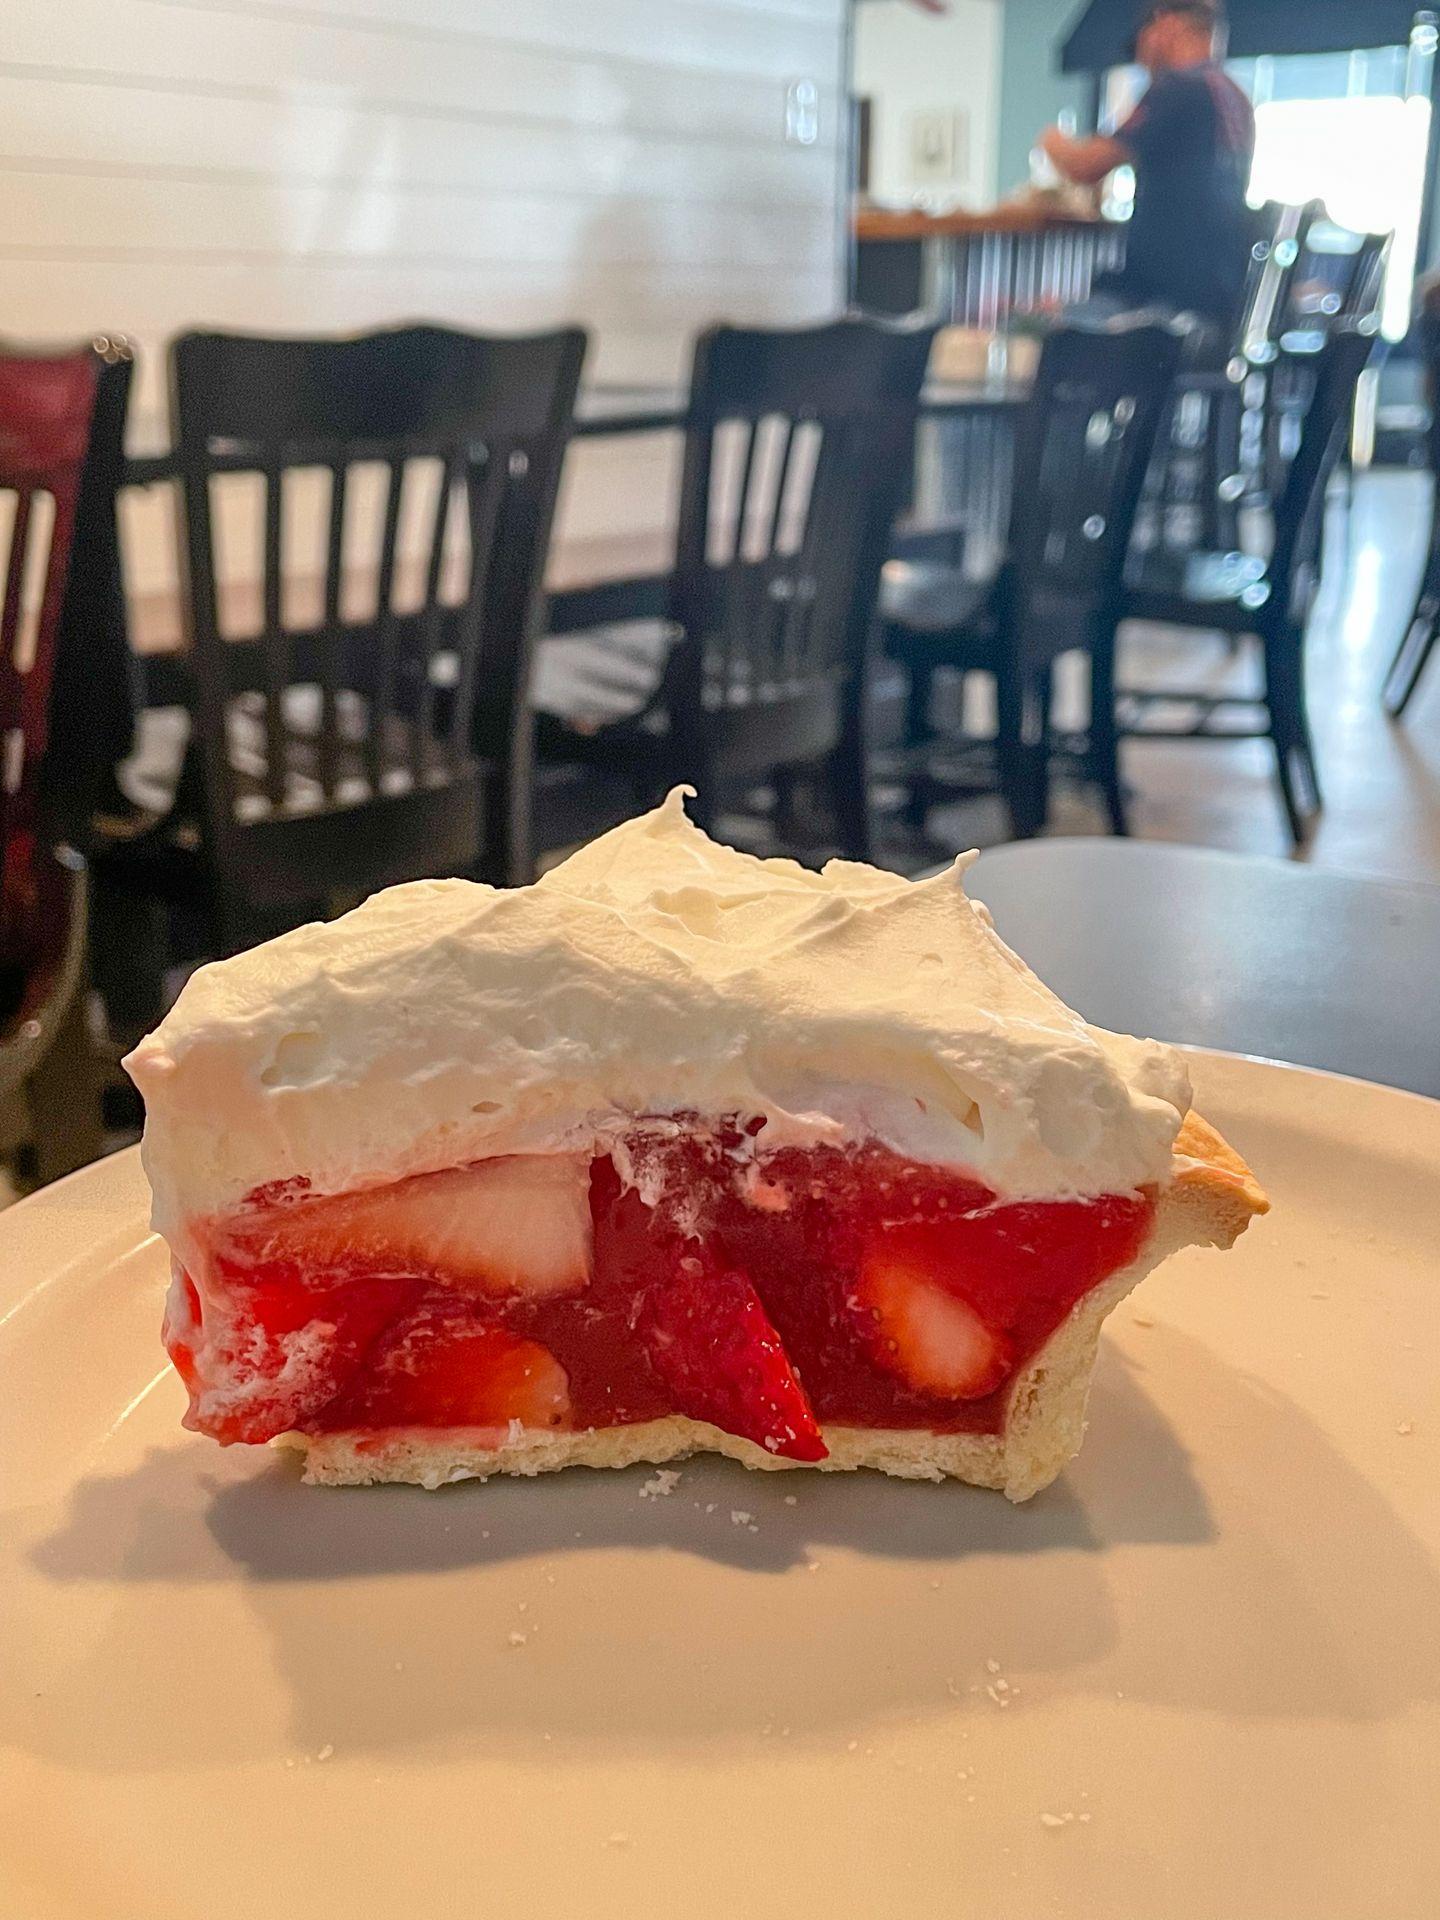 A tall slice of strawberry pie topped with whipped cream.